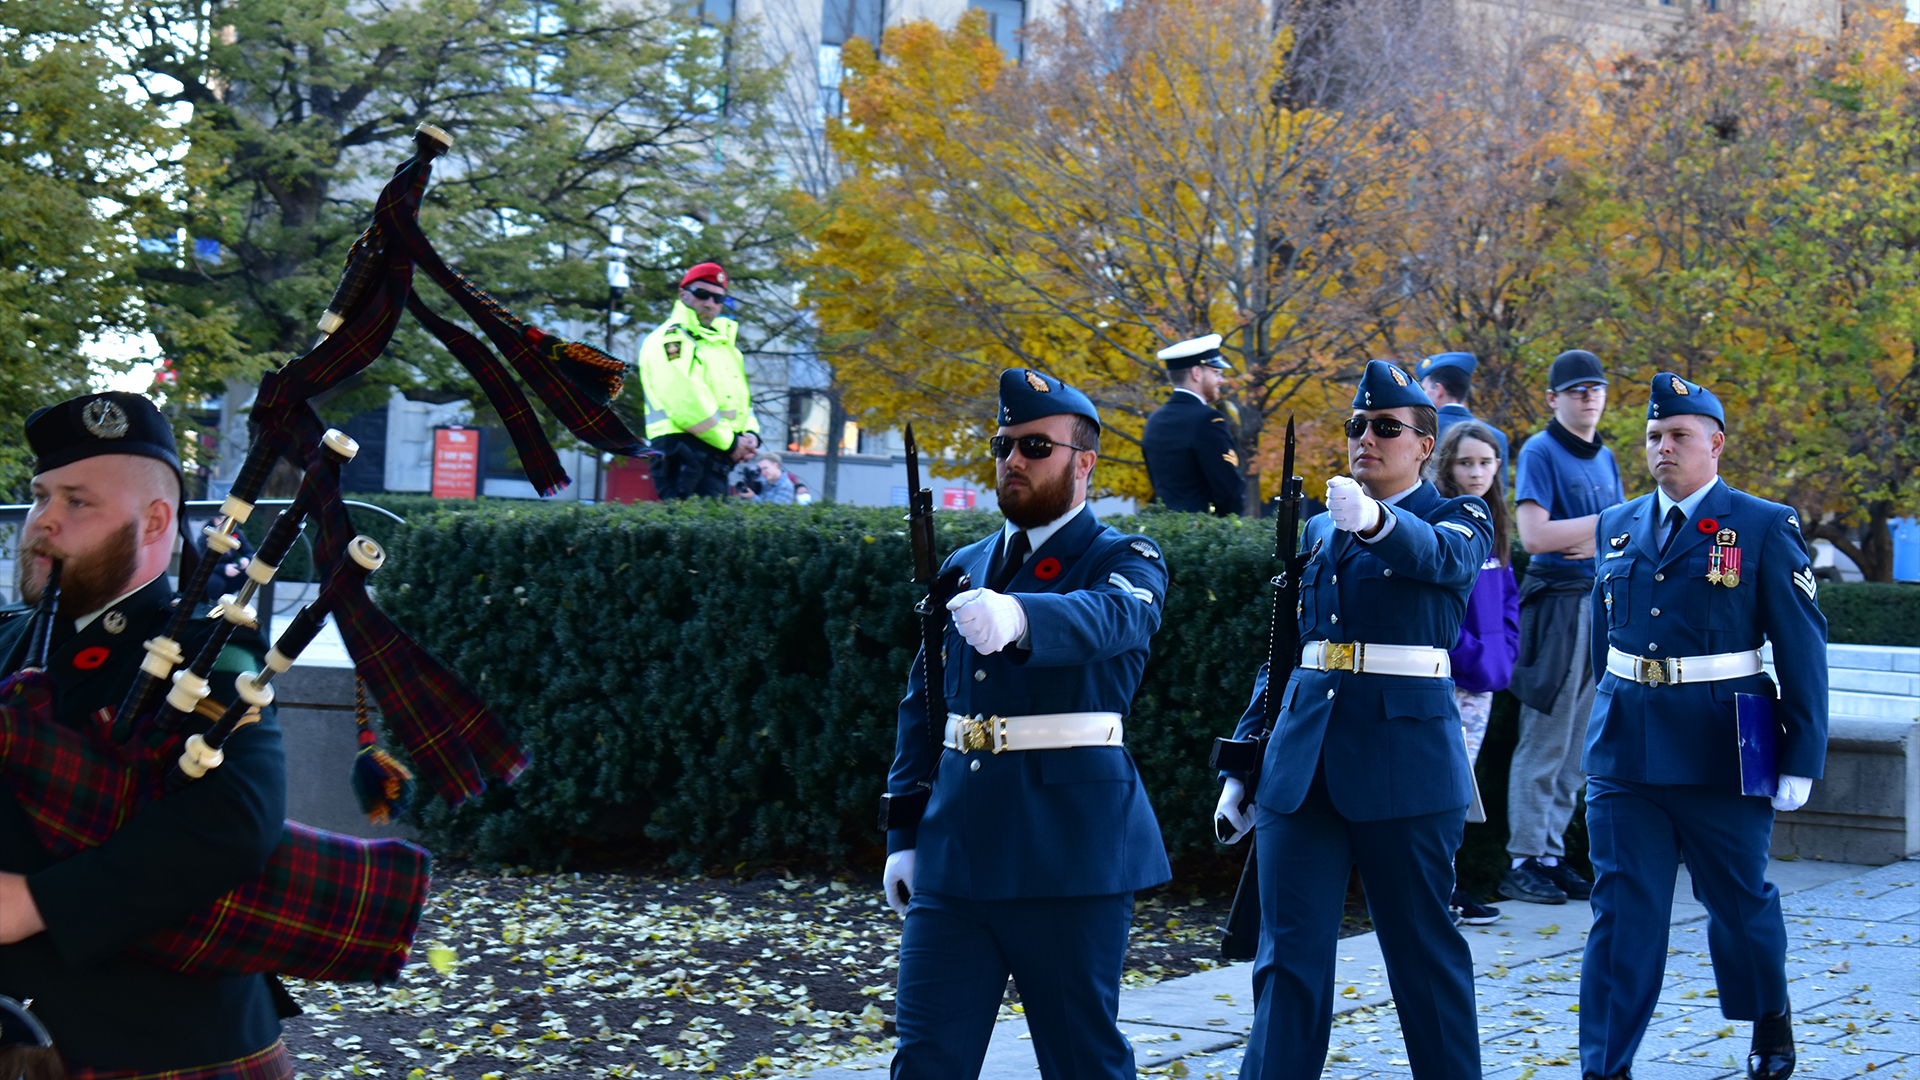 Remembrance Day gives people a chance to reflect and appreciate the freedoms they enjoy today due to the sacrifice of the men and women in all branches of the military - past or present.